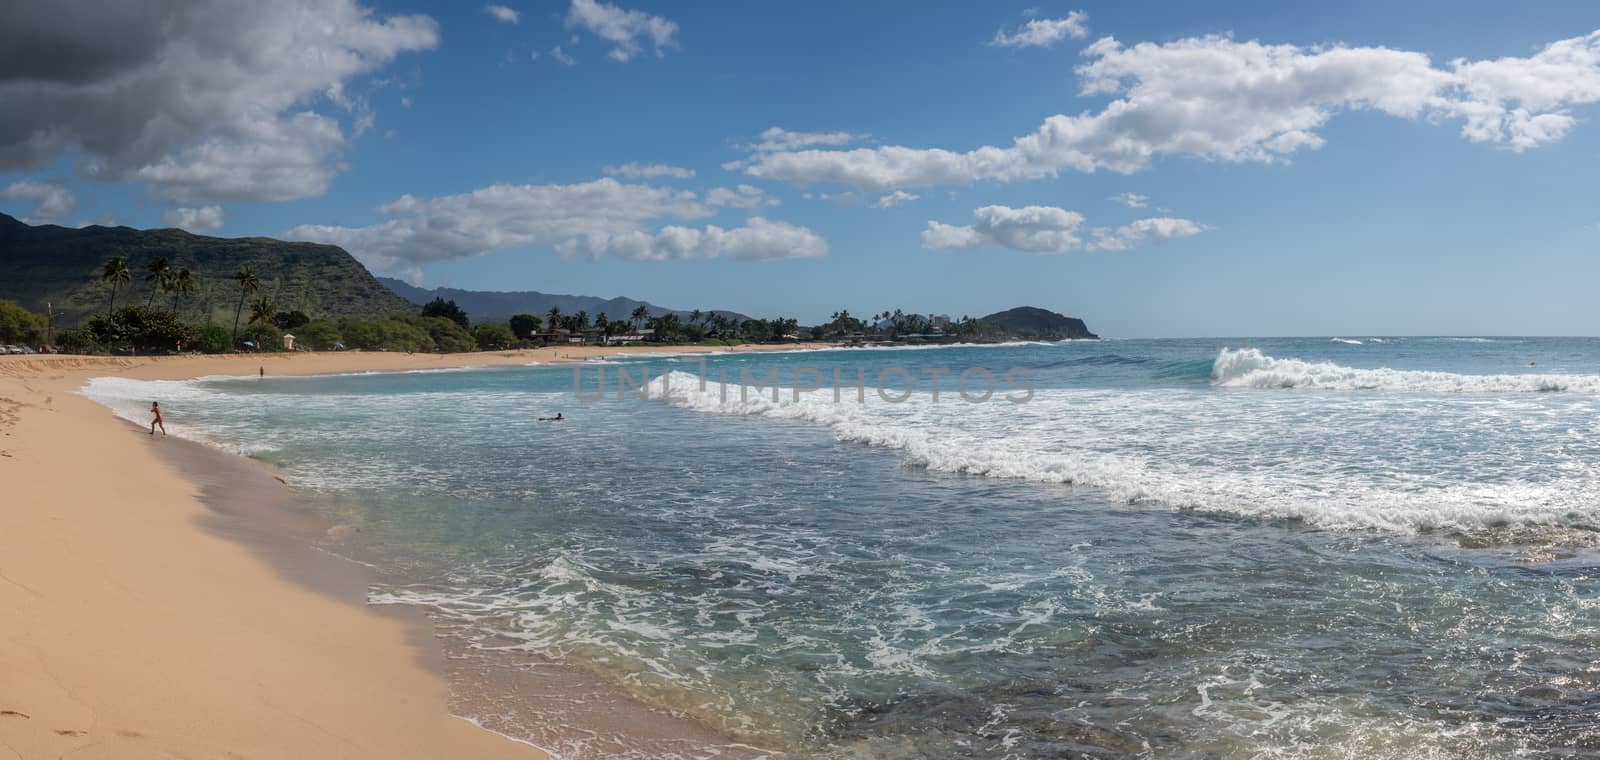 Winter waves crash on the broad sandy shore at Makaha beach park on Oahu by steheap